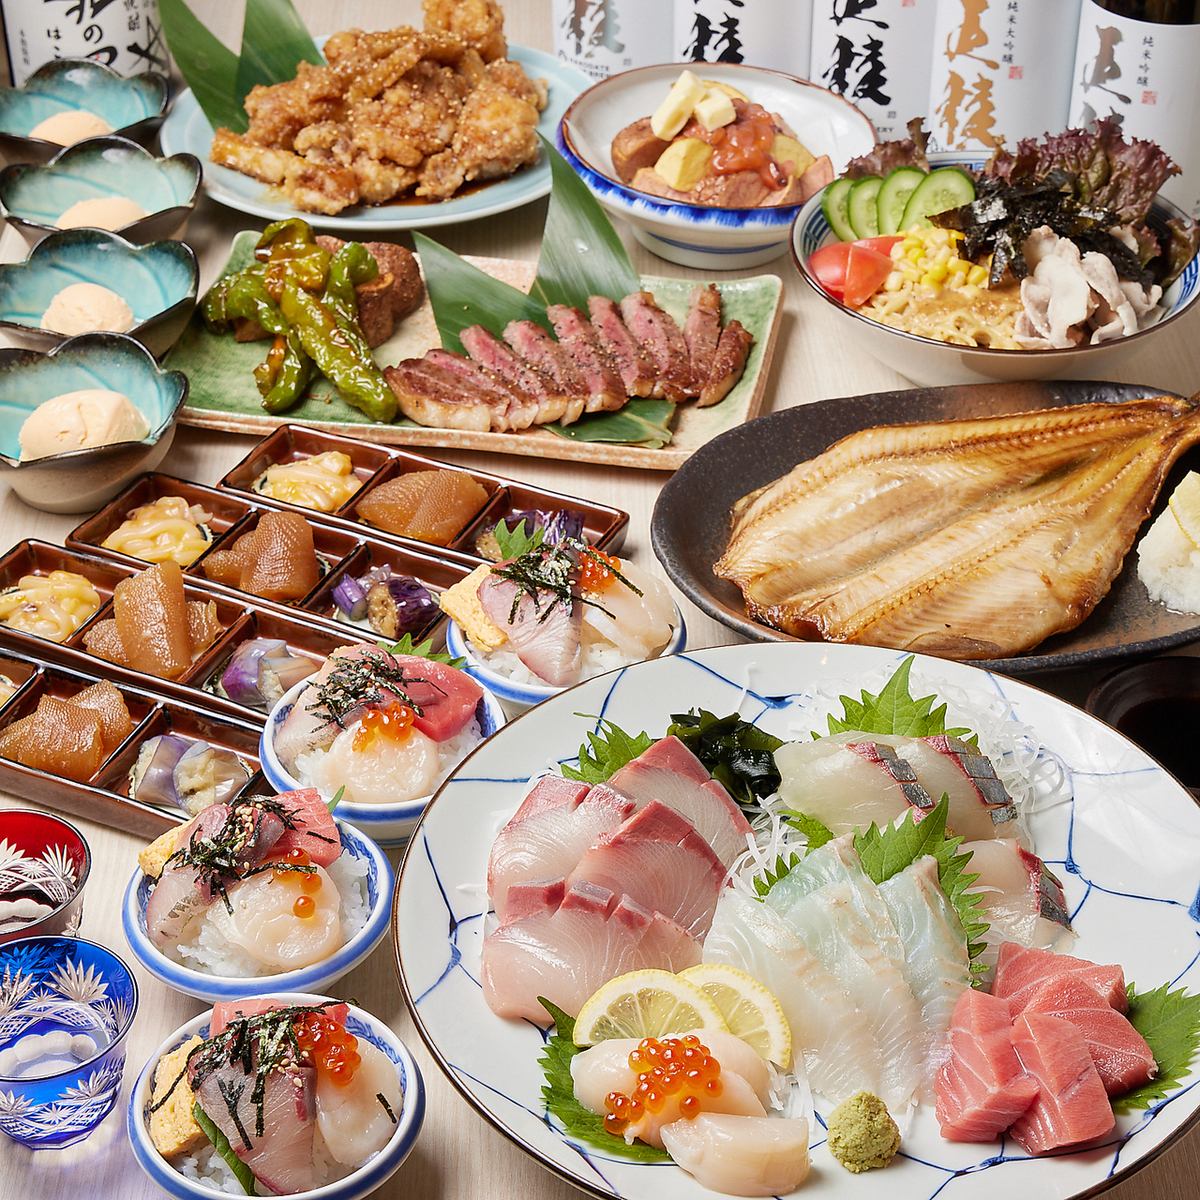 Enjoy seafood dishes in a lively restaurant ♪ We have a wide variety of carefully selected snacks and alcoholic beverages!